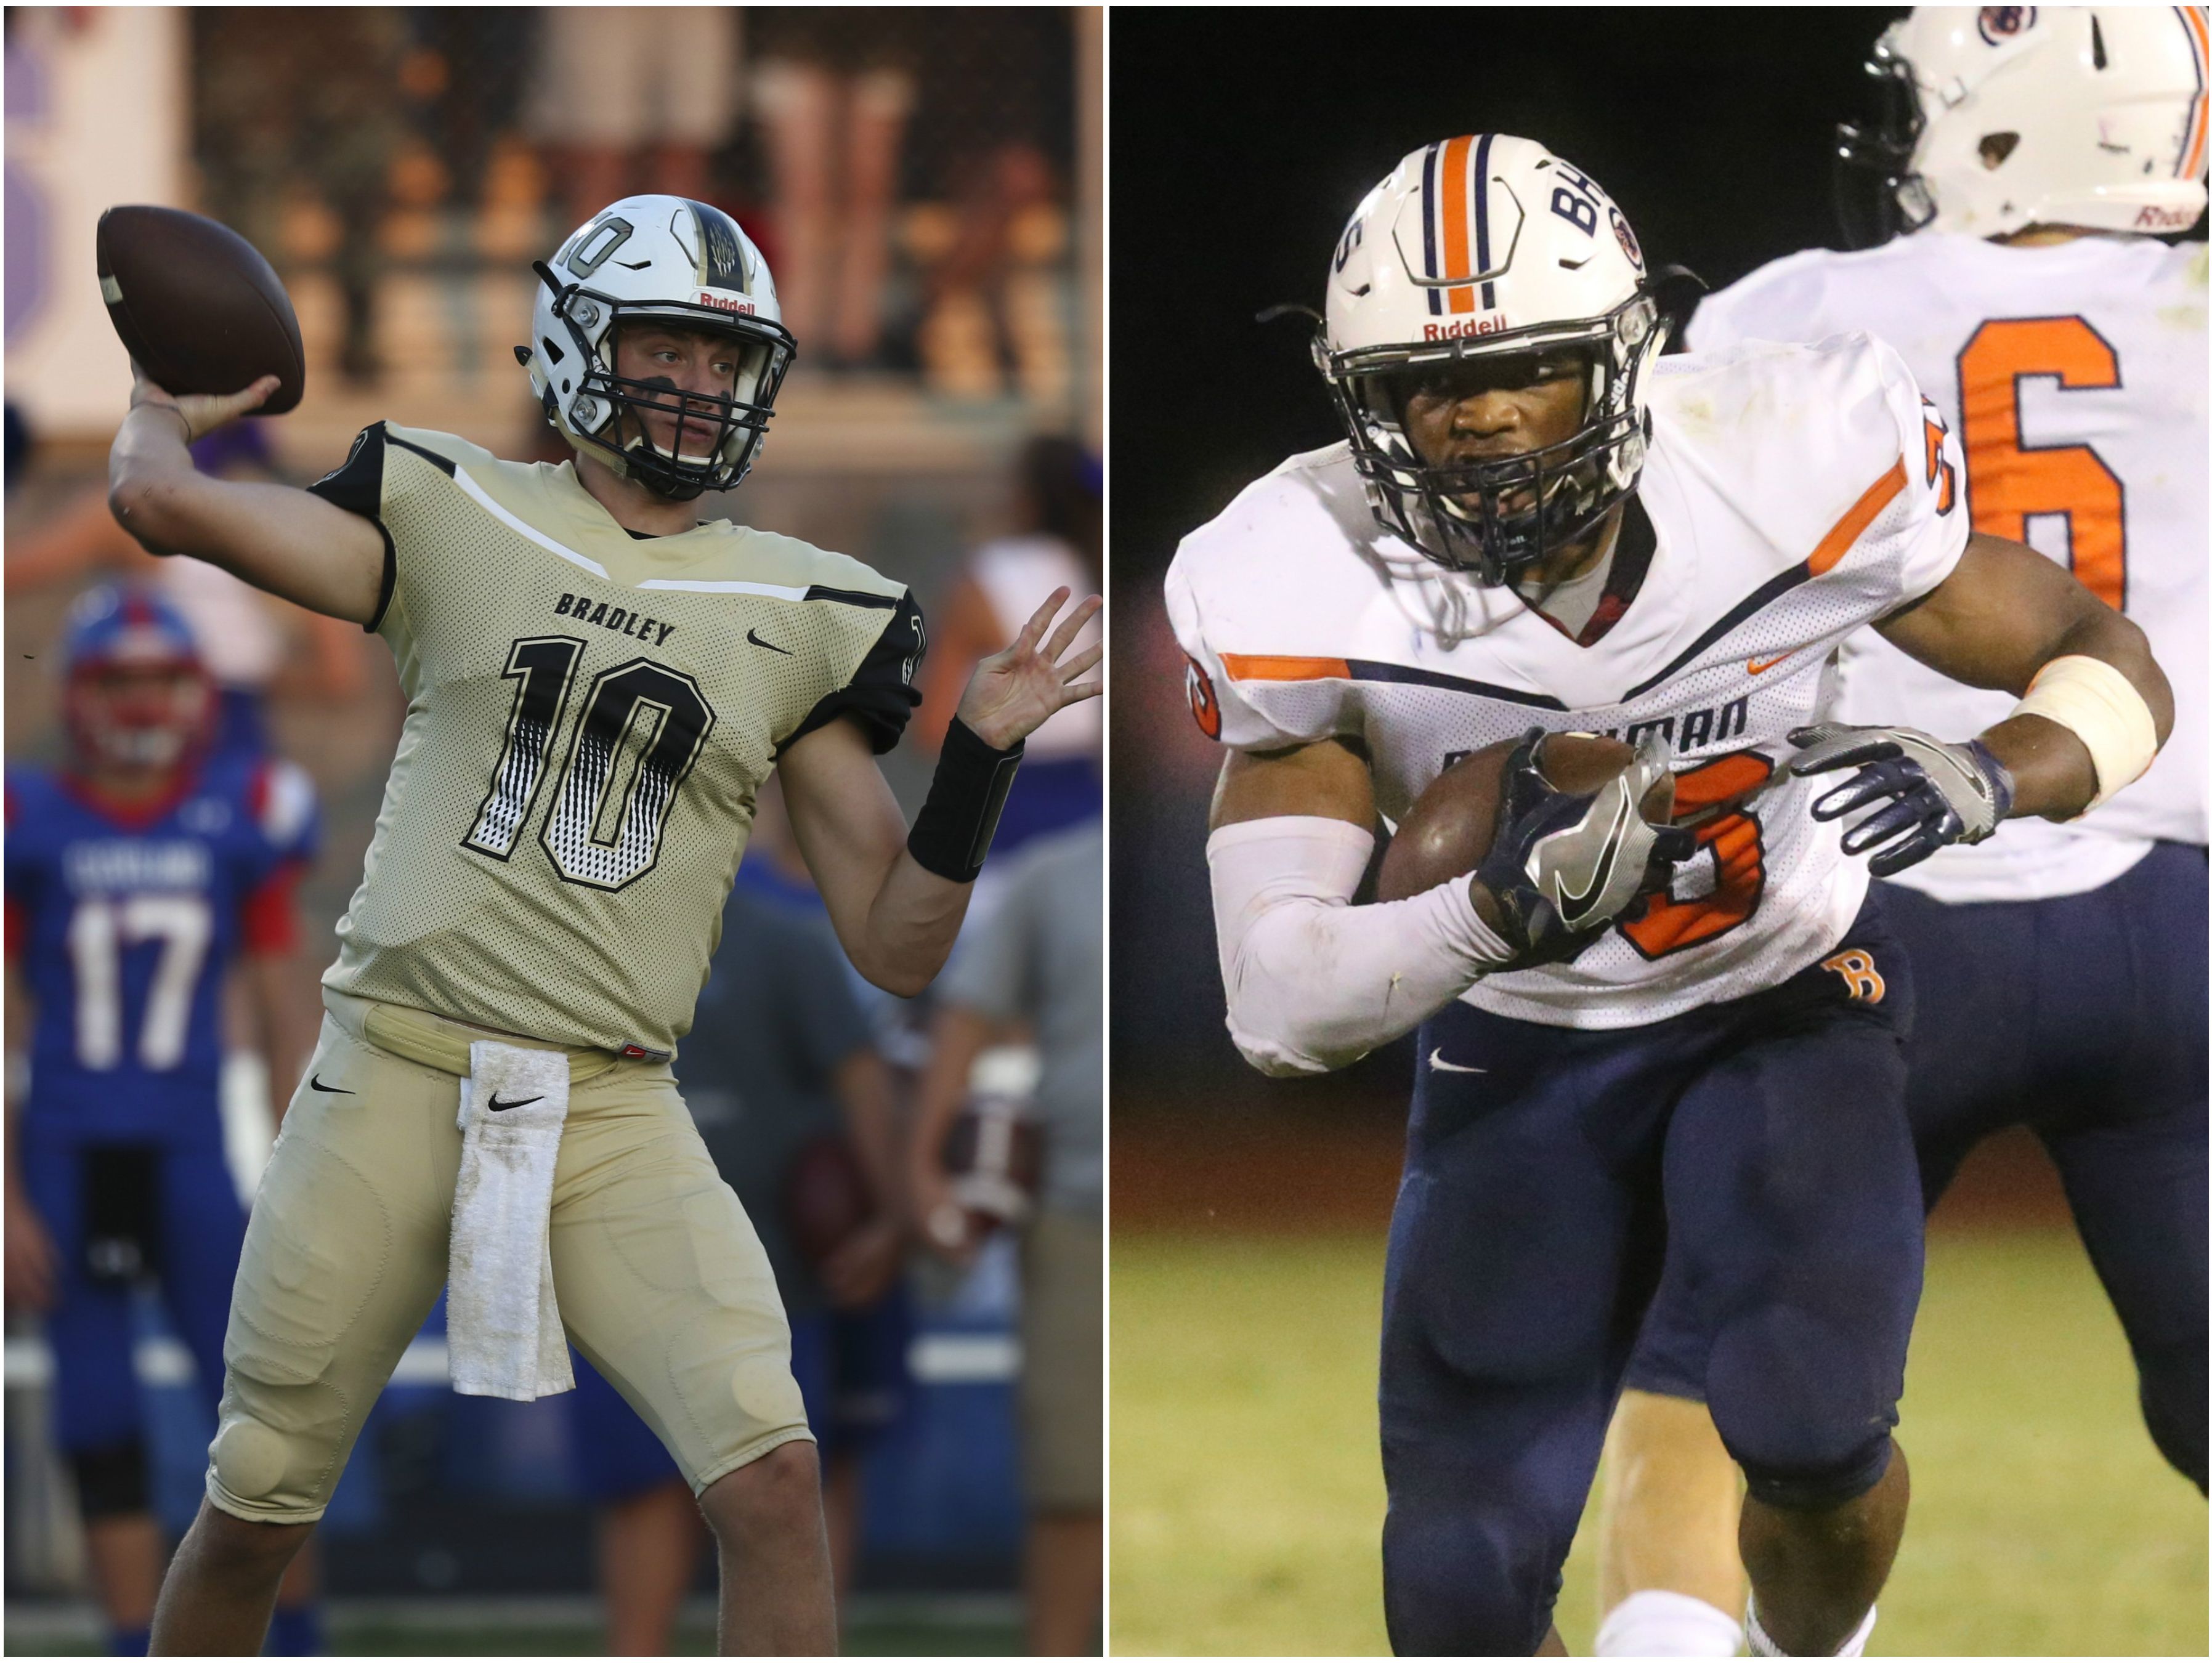 Bradley Central quarterback Cole Copeland (left) and Blackman running back Master Teague (right)